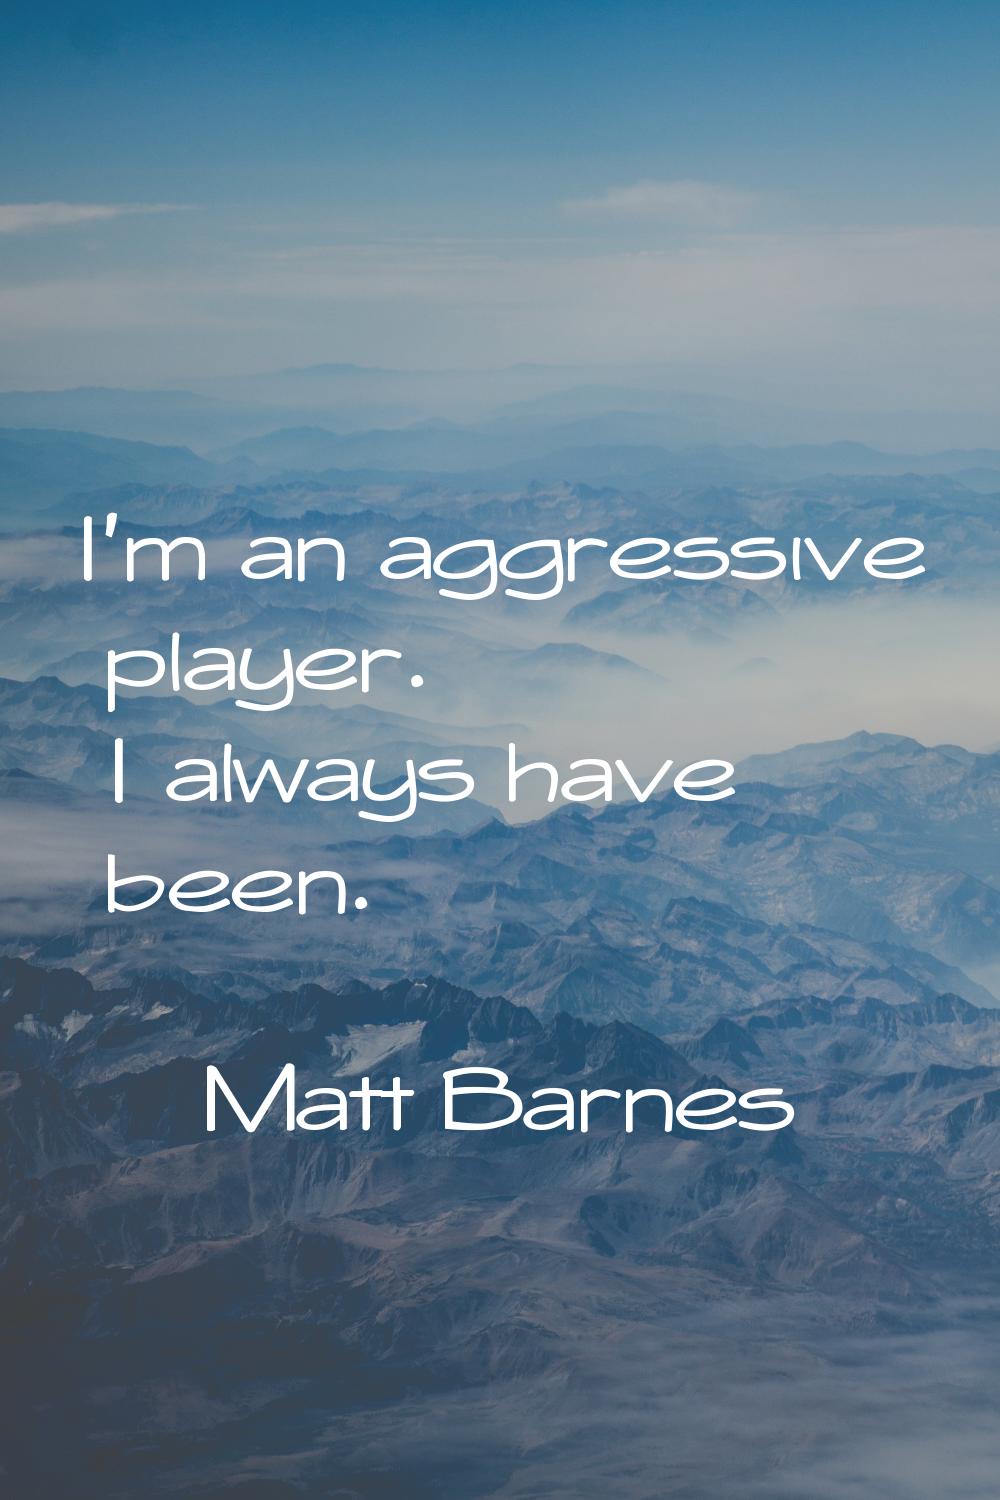 I'm an aggressive player. I always have been.